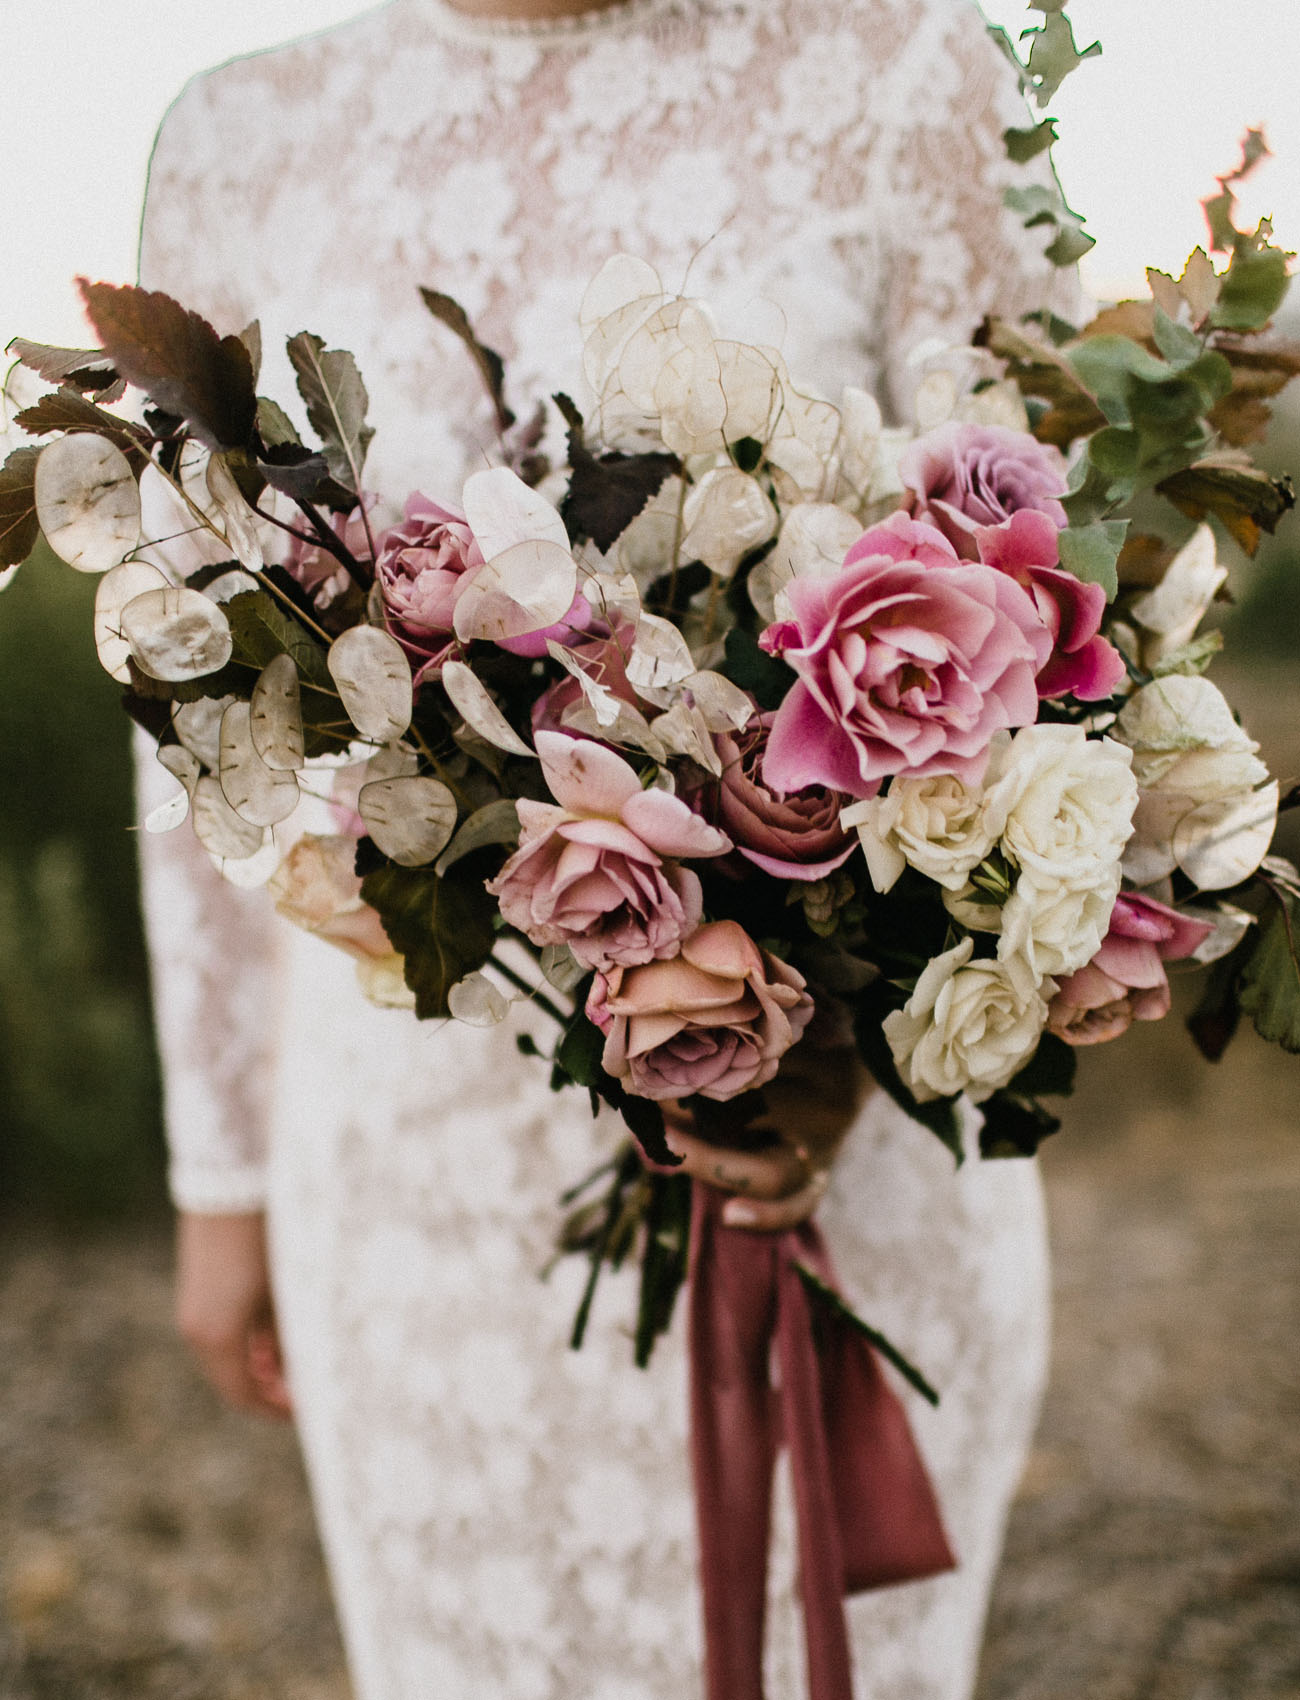 Look at the gorgeous bridal bouquet with pink roses and dusty pink ribbons